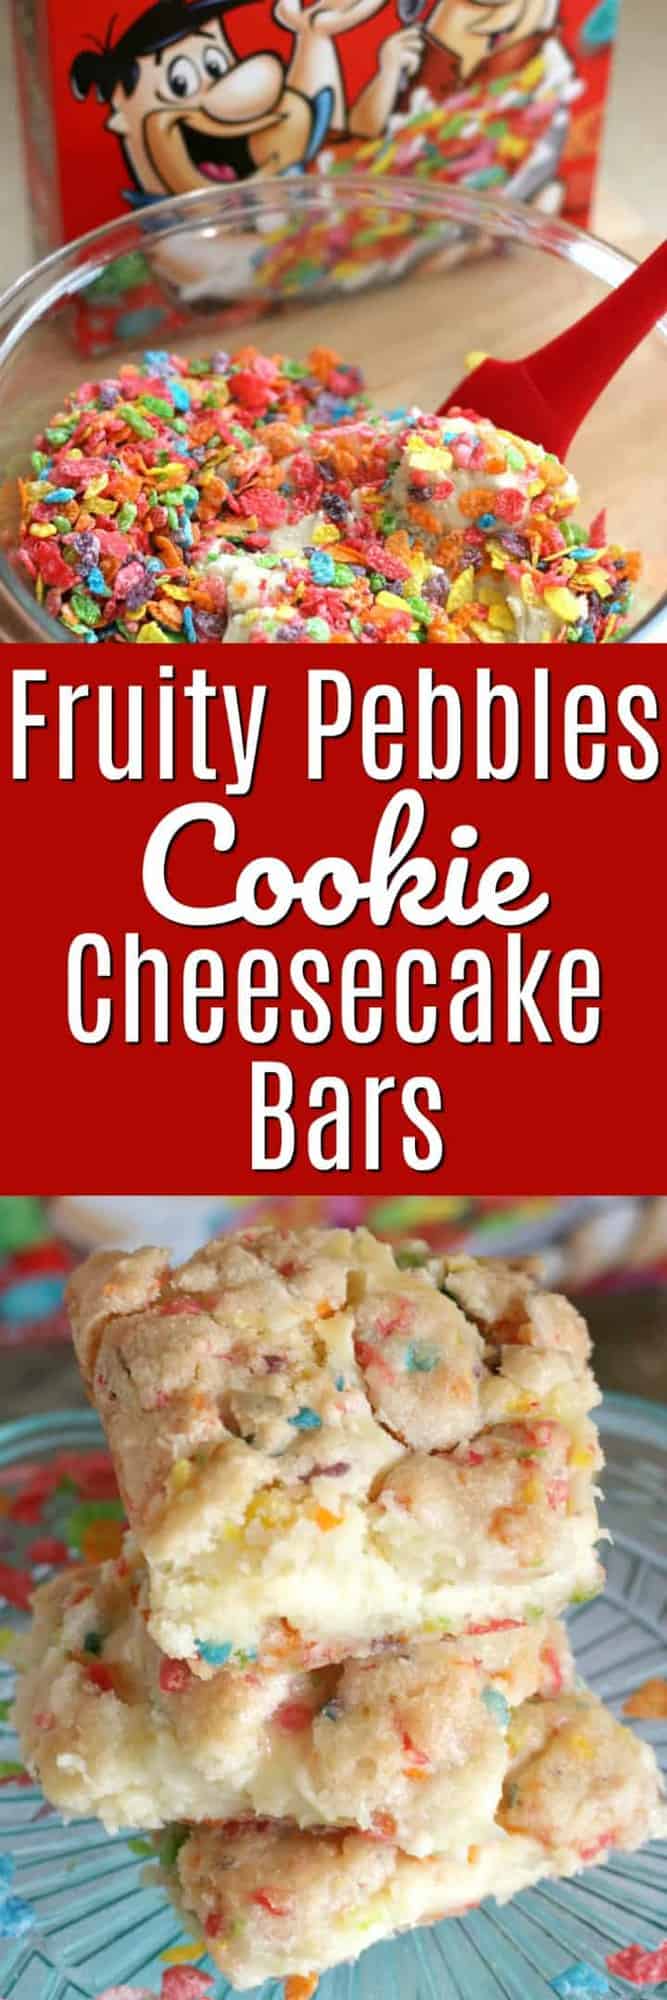 A Pinterest image for fruity pebble cookie cheesecake bars